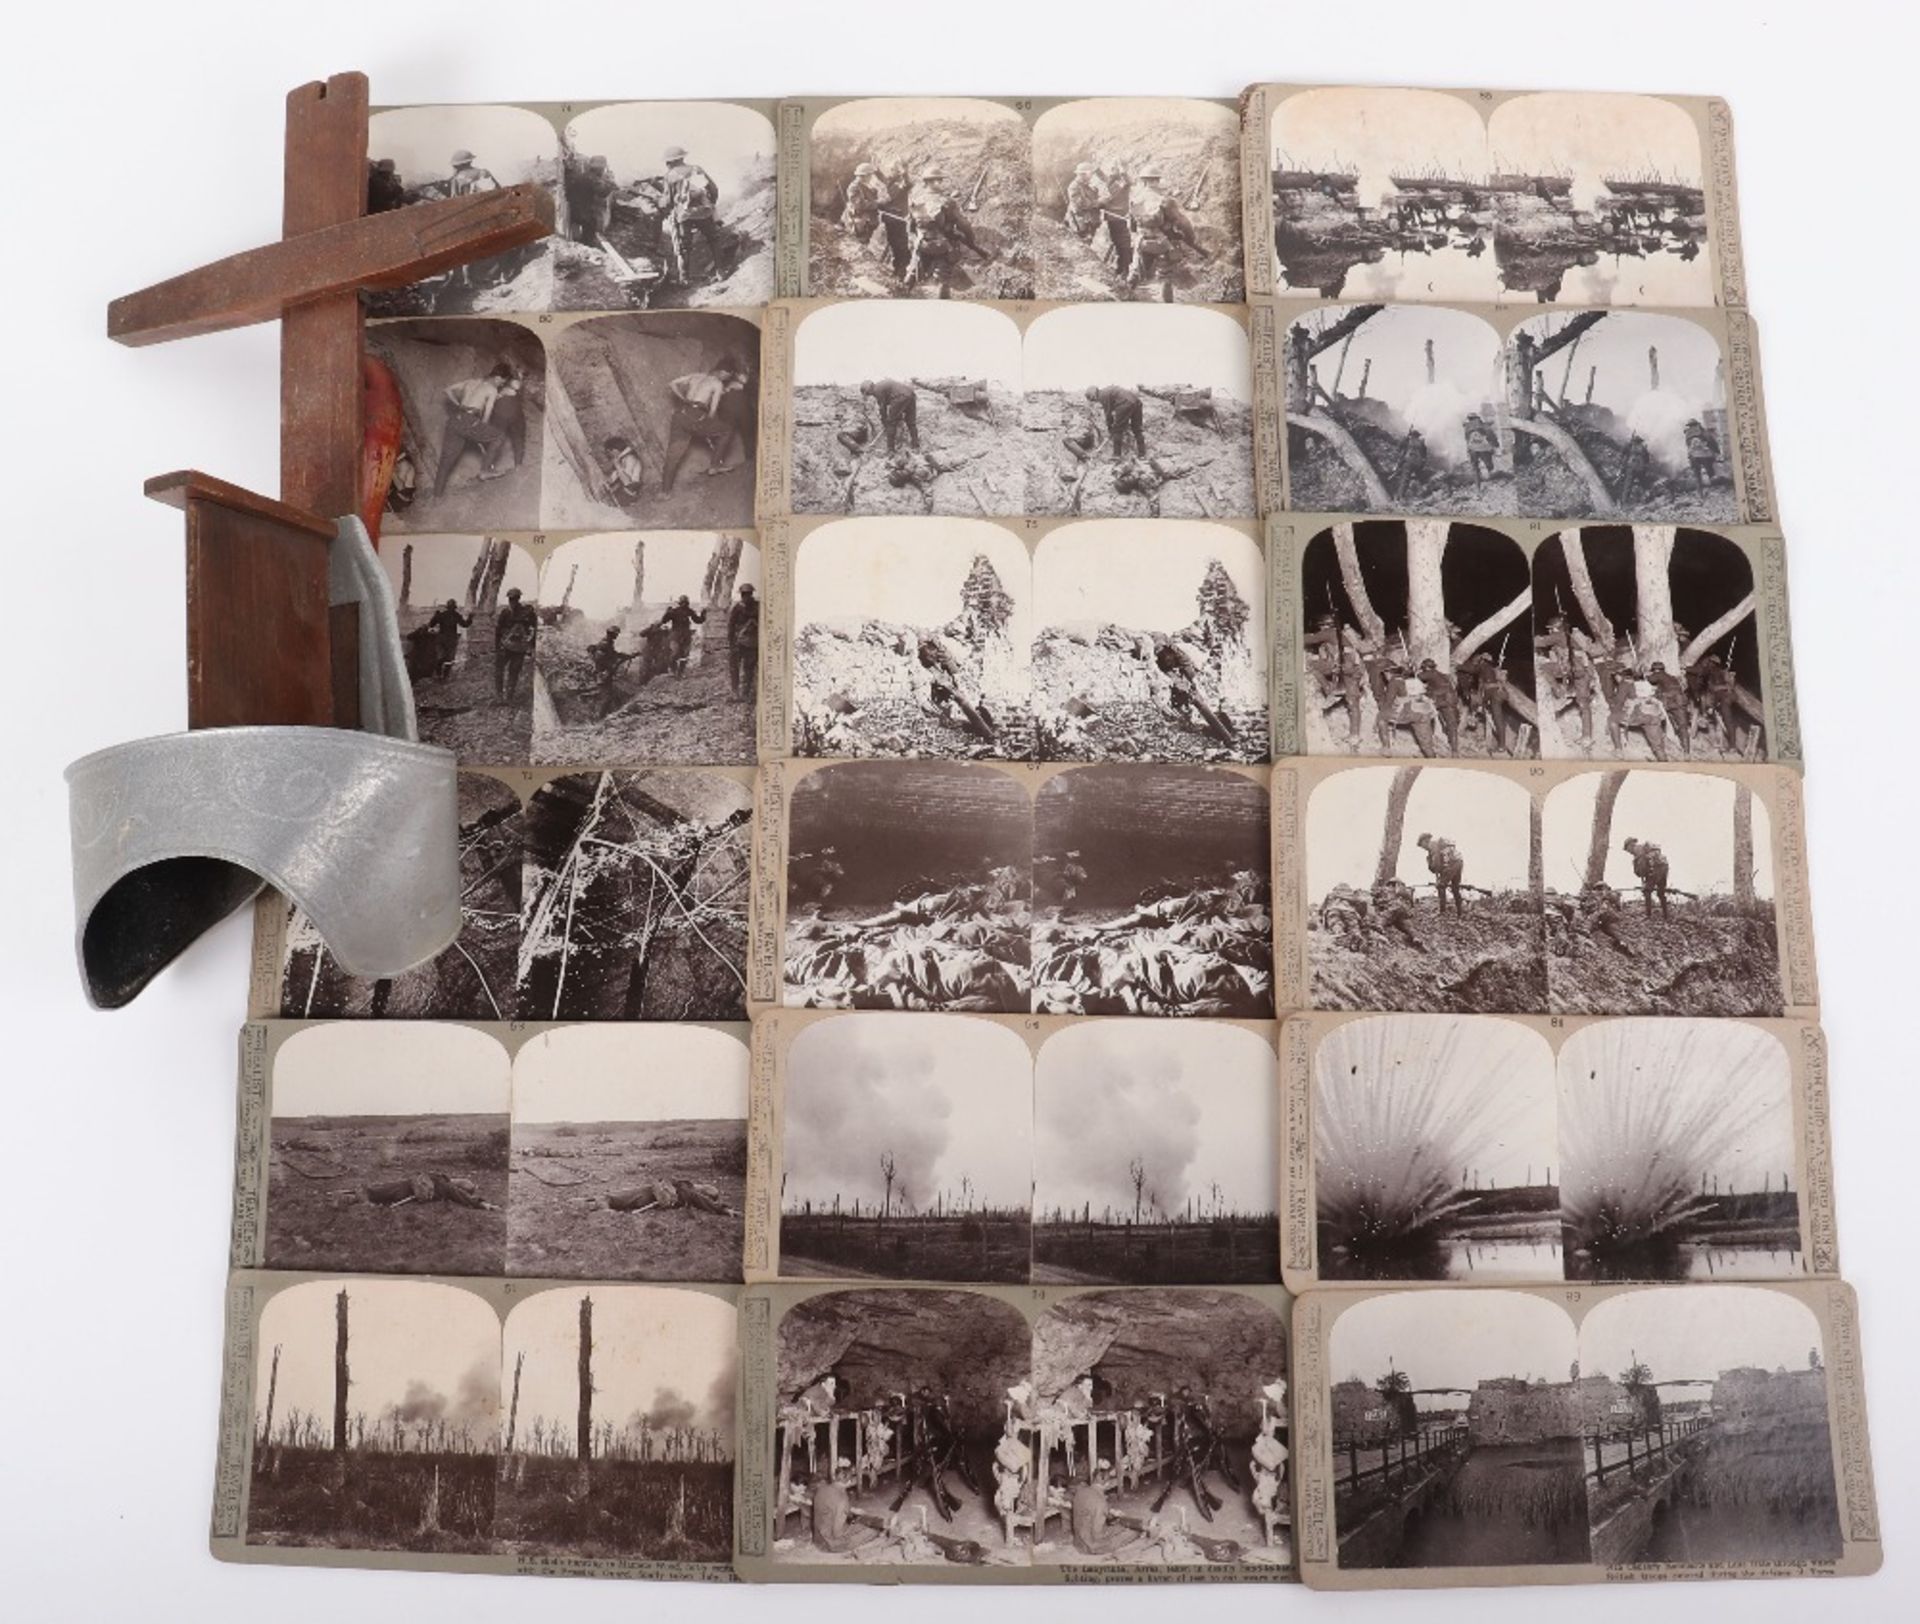 Original Great War Stereo Photographs with Viewer